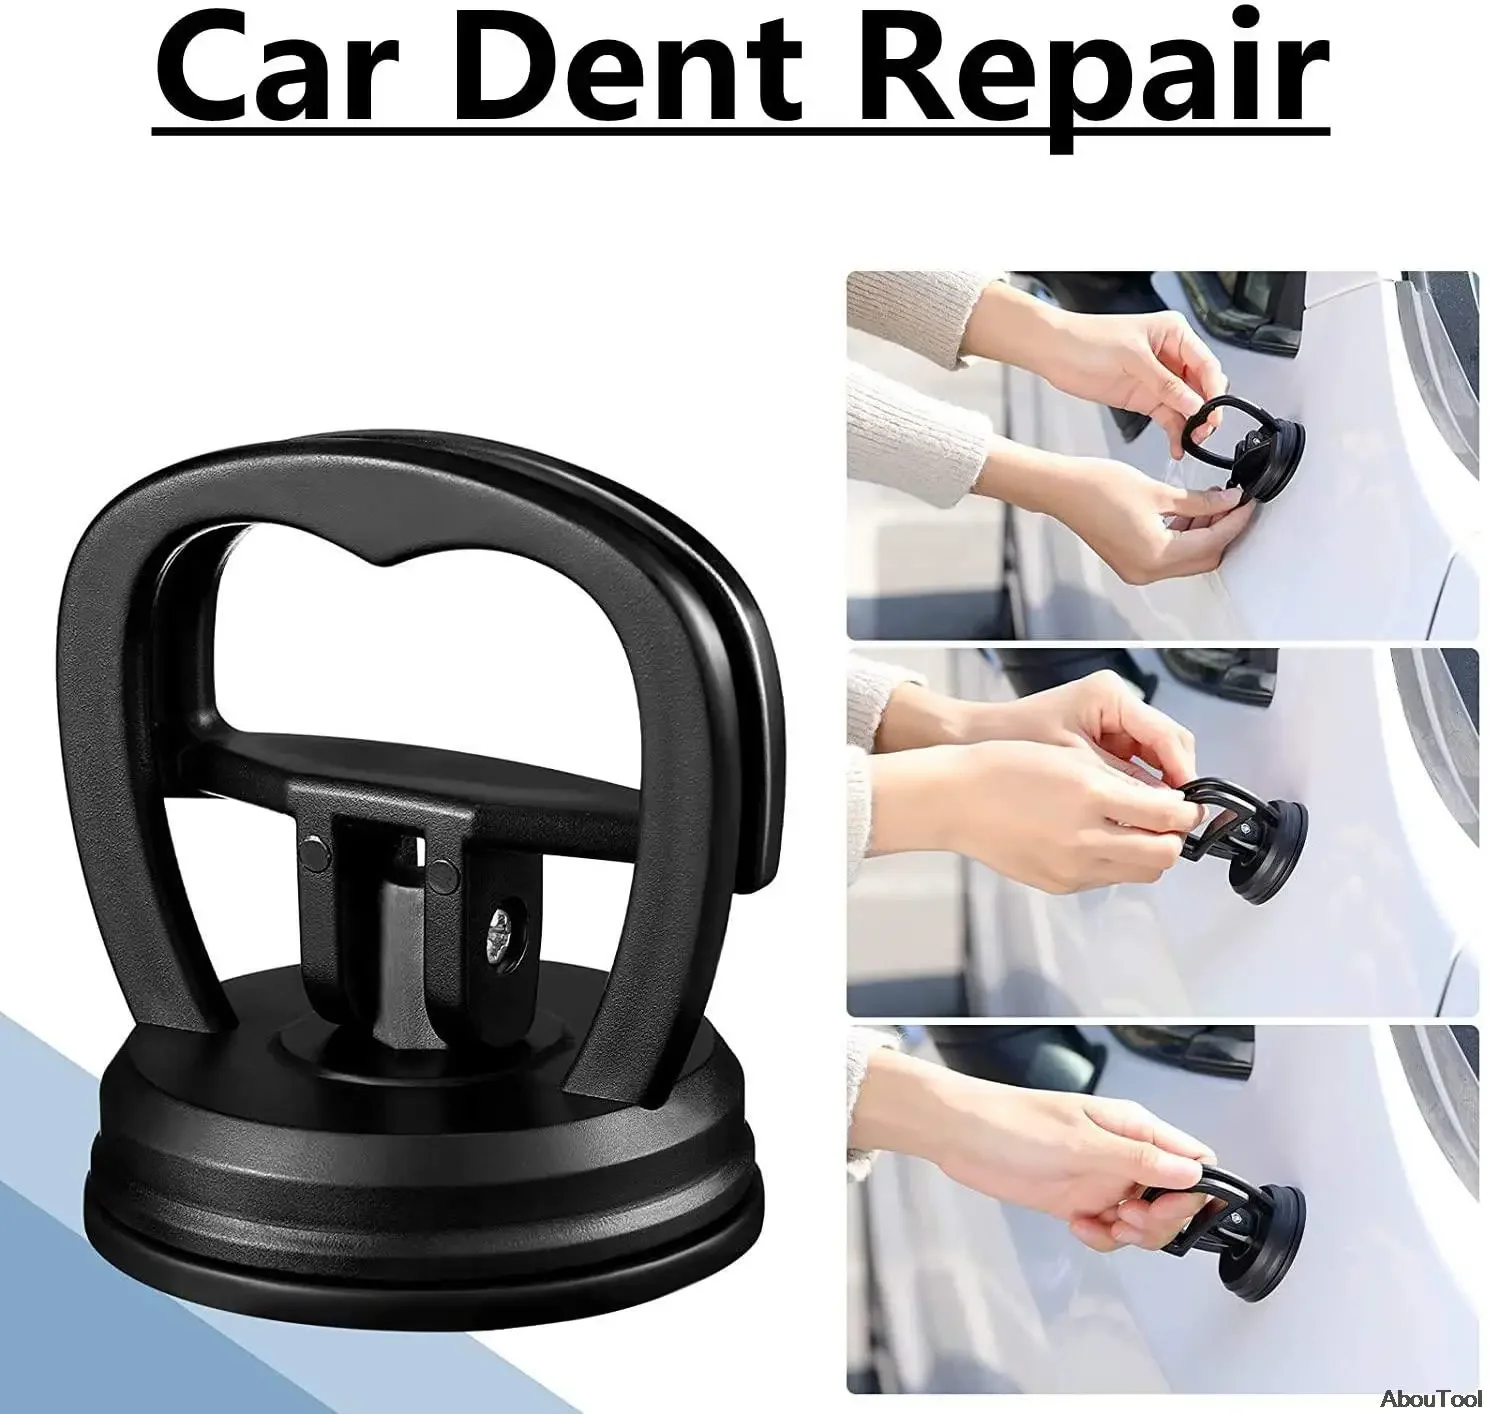 

Large Metal Dent Puller Tools for Car Dent Repair Auto, Suction Cup Dent Remover for Big Size Dents, Car Accessories Glass Lift